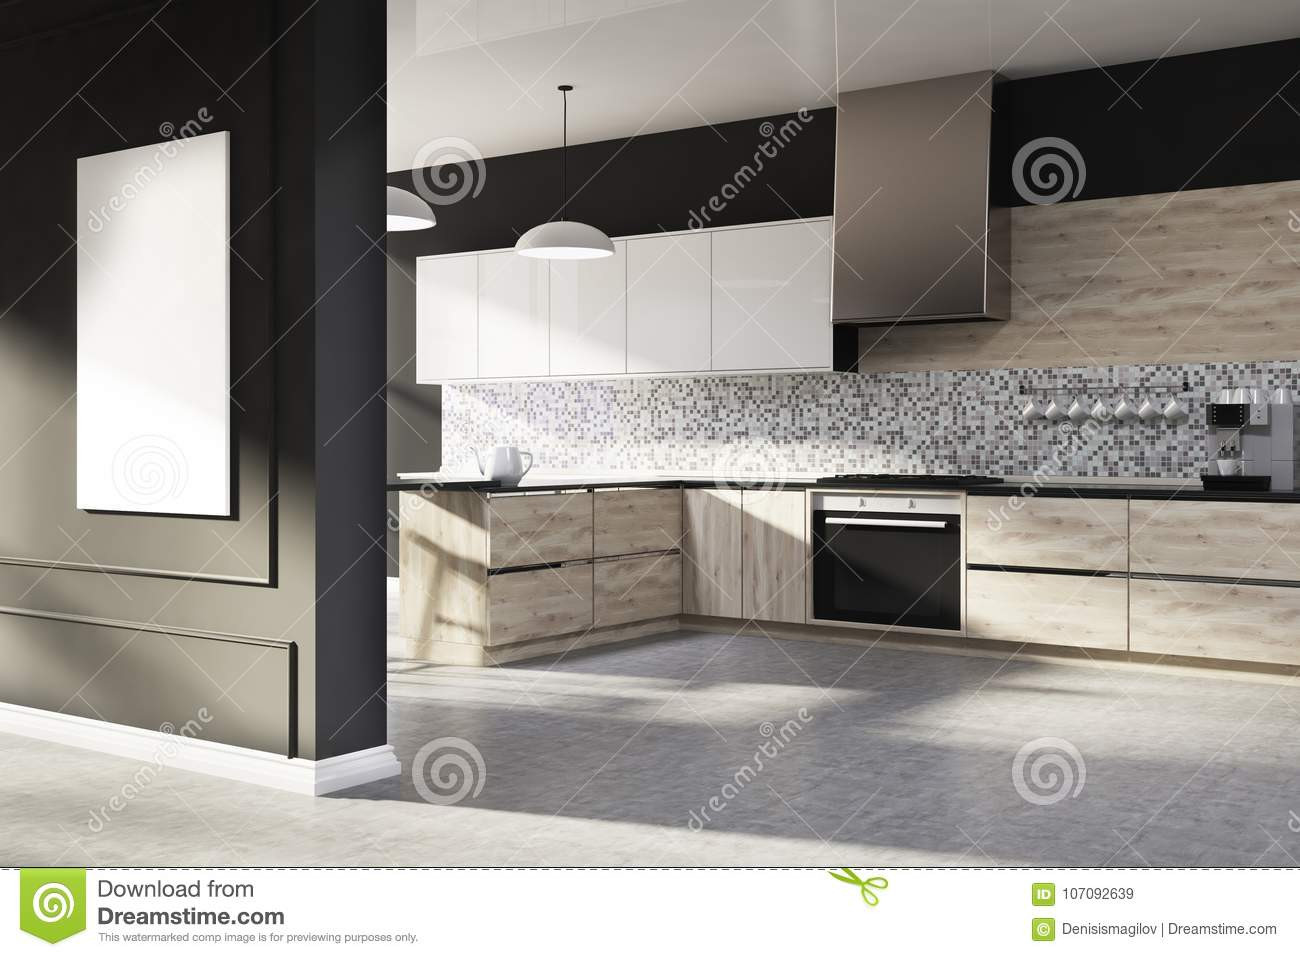 13 Stylish Black Hardwood Floors In Kitchen 2024 free download black hardwood floors in kitchen of black mosaic kitchen poster side stock illustration illustration intended for black kitchen interior with a mosaic wall a concrete floor light wooden and 